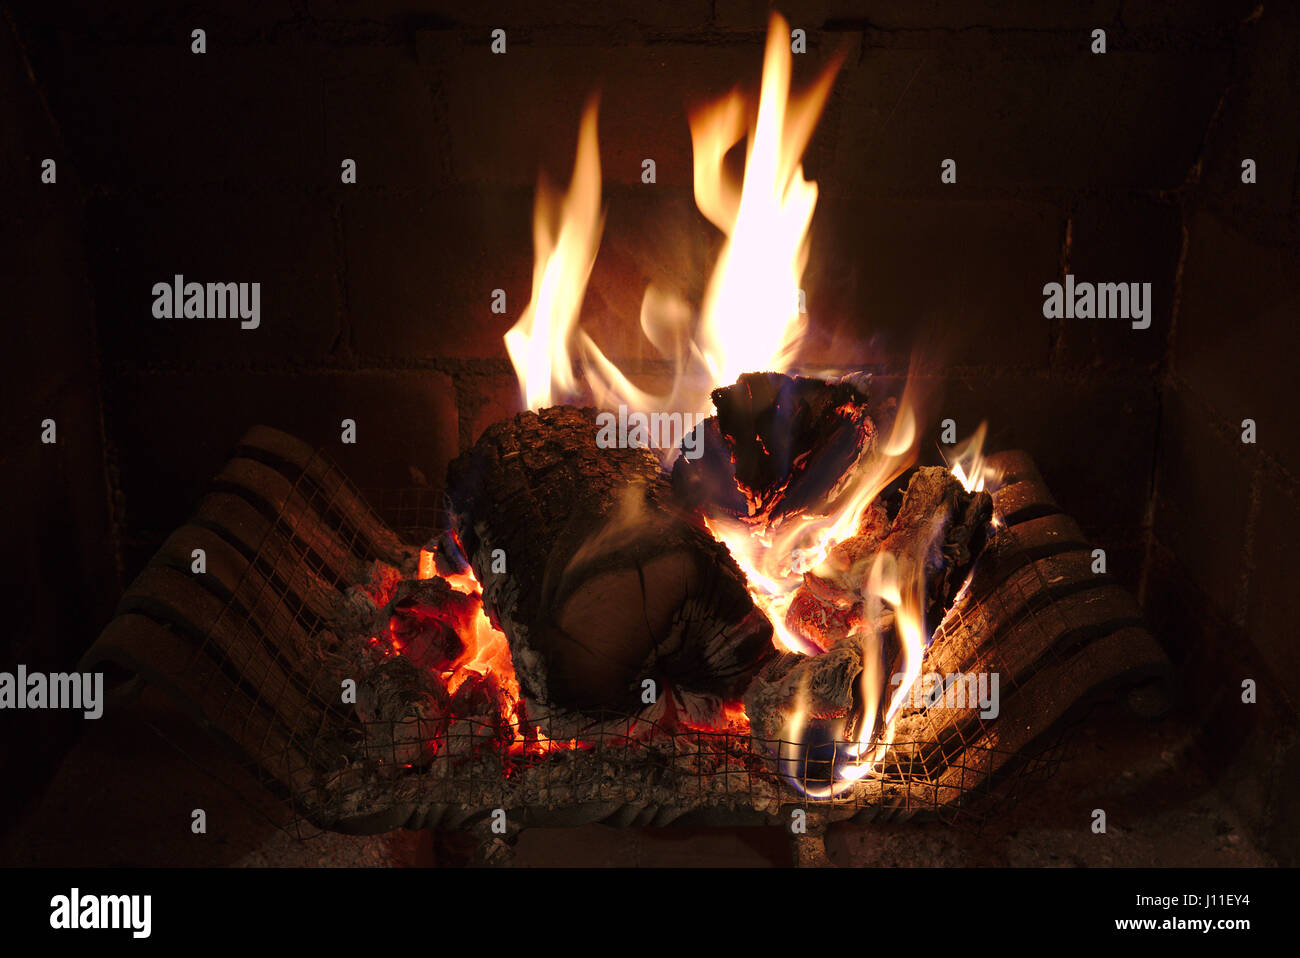 Logs burning in a fireplace Stock Photo